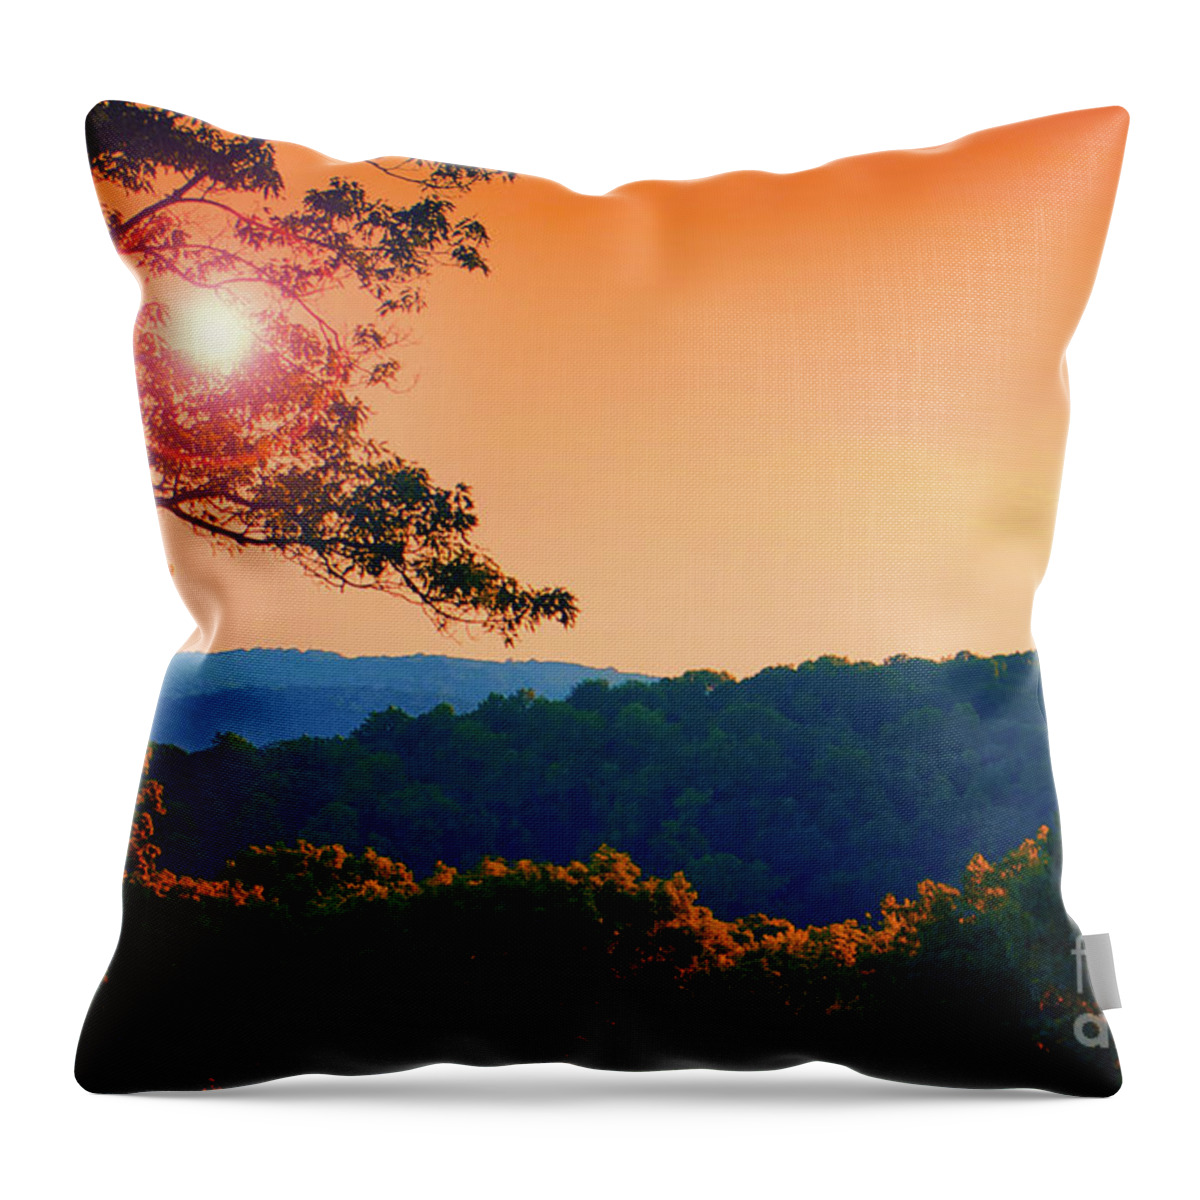 Landscape Throw Pillow featuring the photograph Sunset Hills by Mark Miller